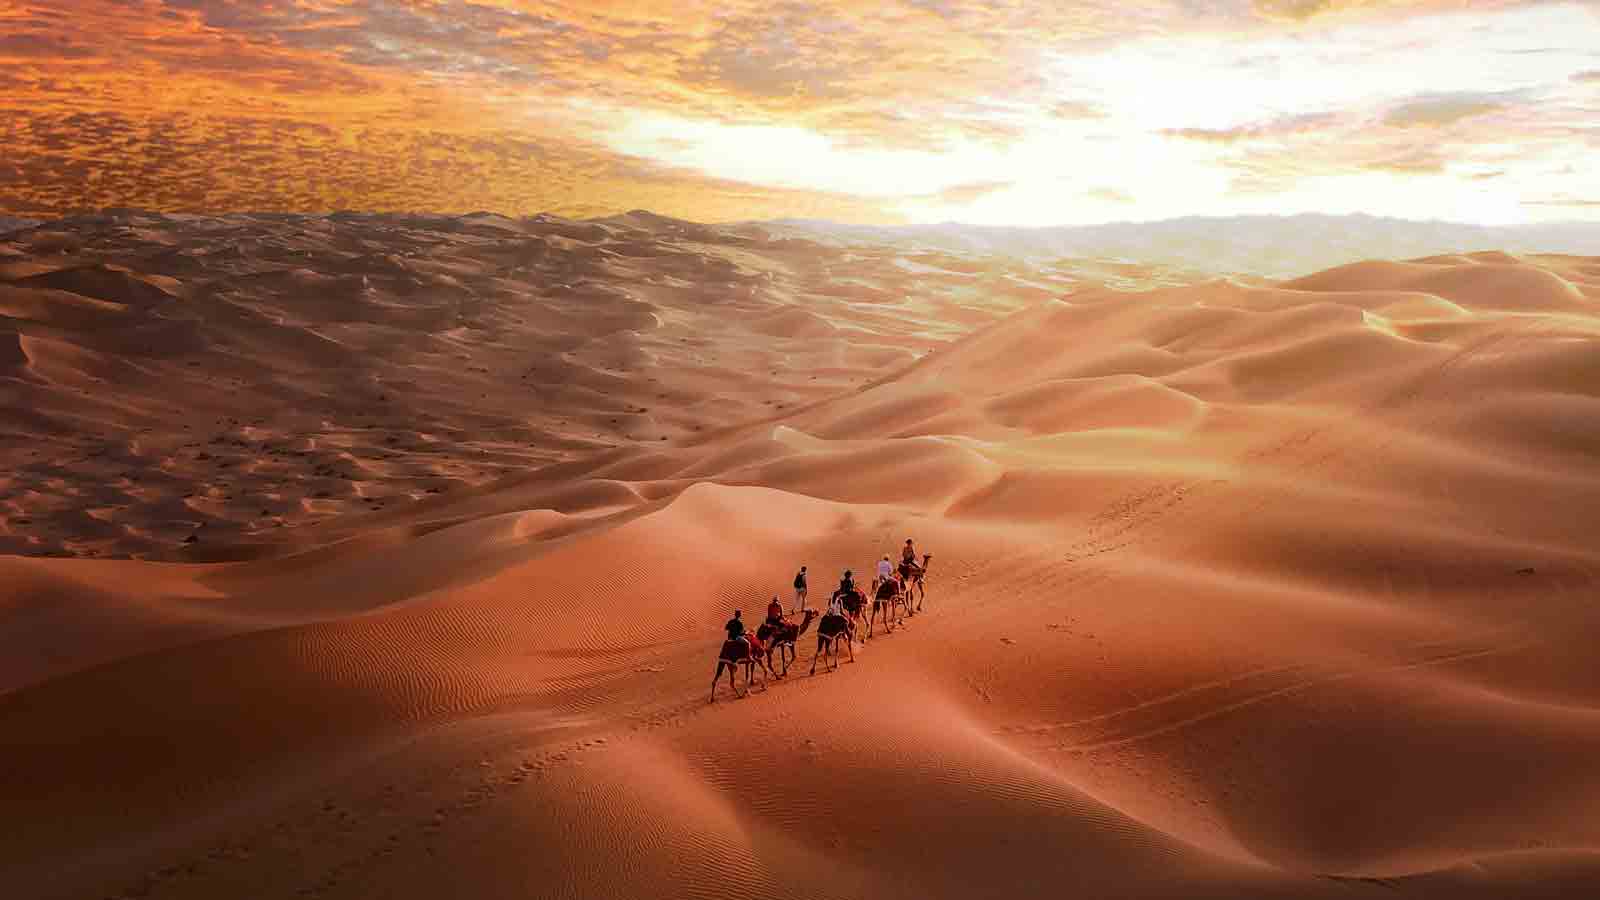 Trekking the sand dunes with camels